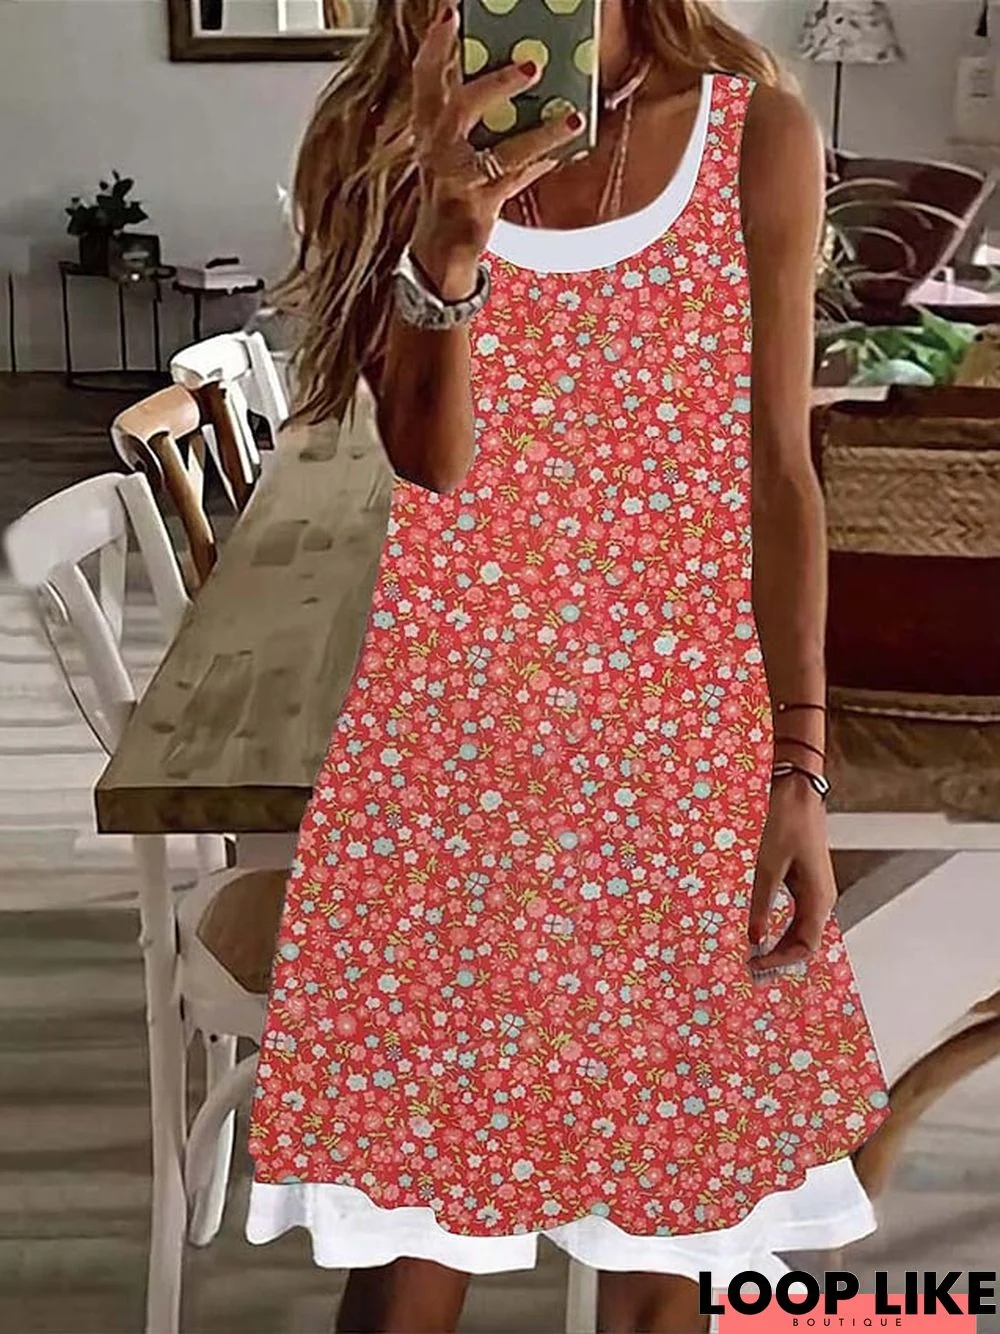 Women's Casual Dress Tank Dress Floral Dress Graphic Floral Fake two piece Print Crew Neck Mini Dress Active Fashion Outdoor Daily Sleeveless Regular Fit Red Spring Summer S M L XL XXL